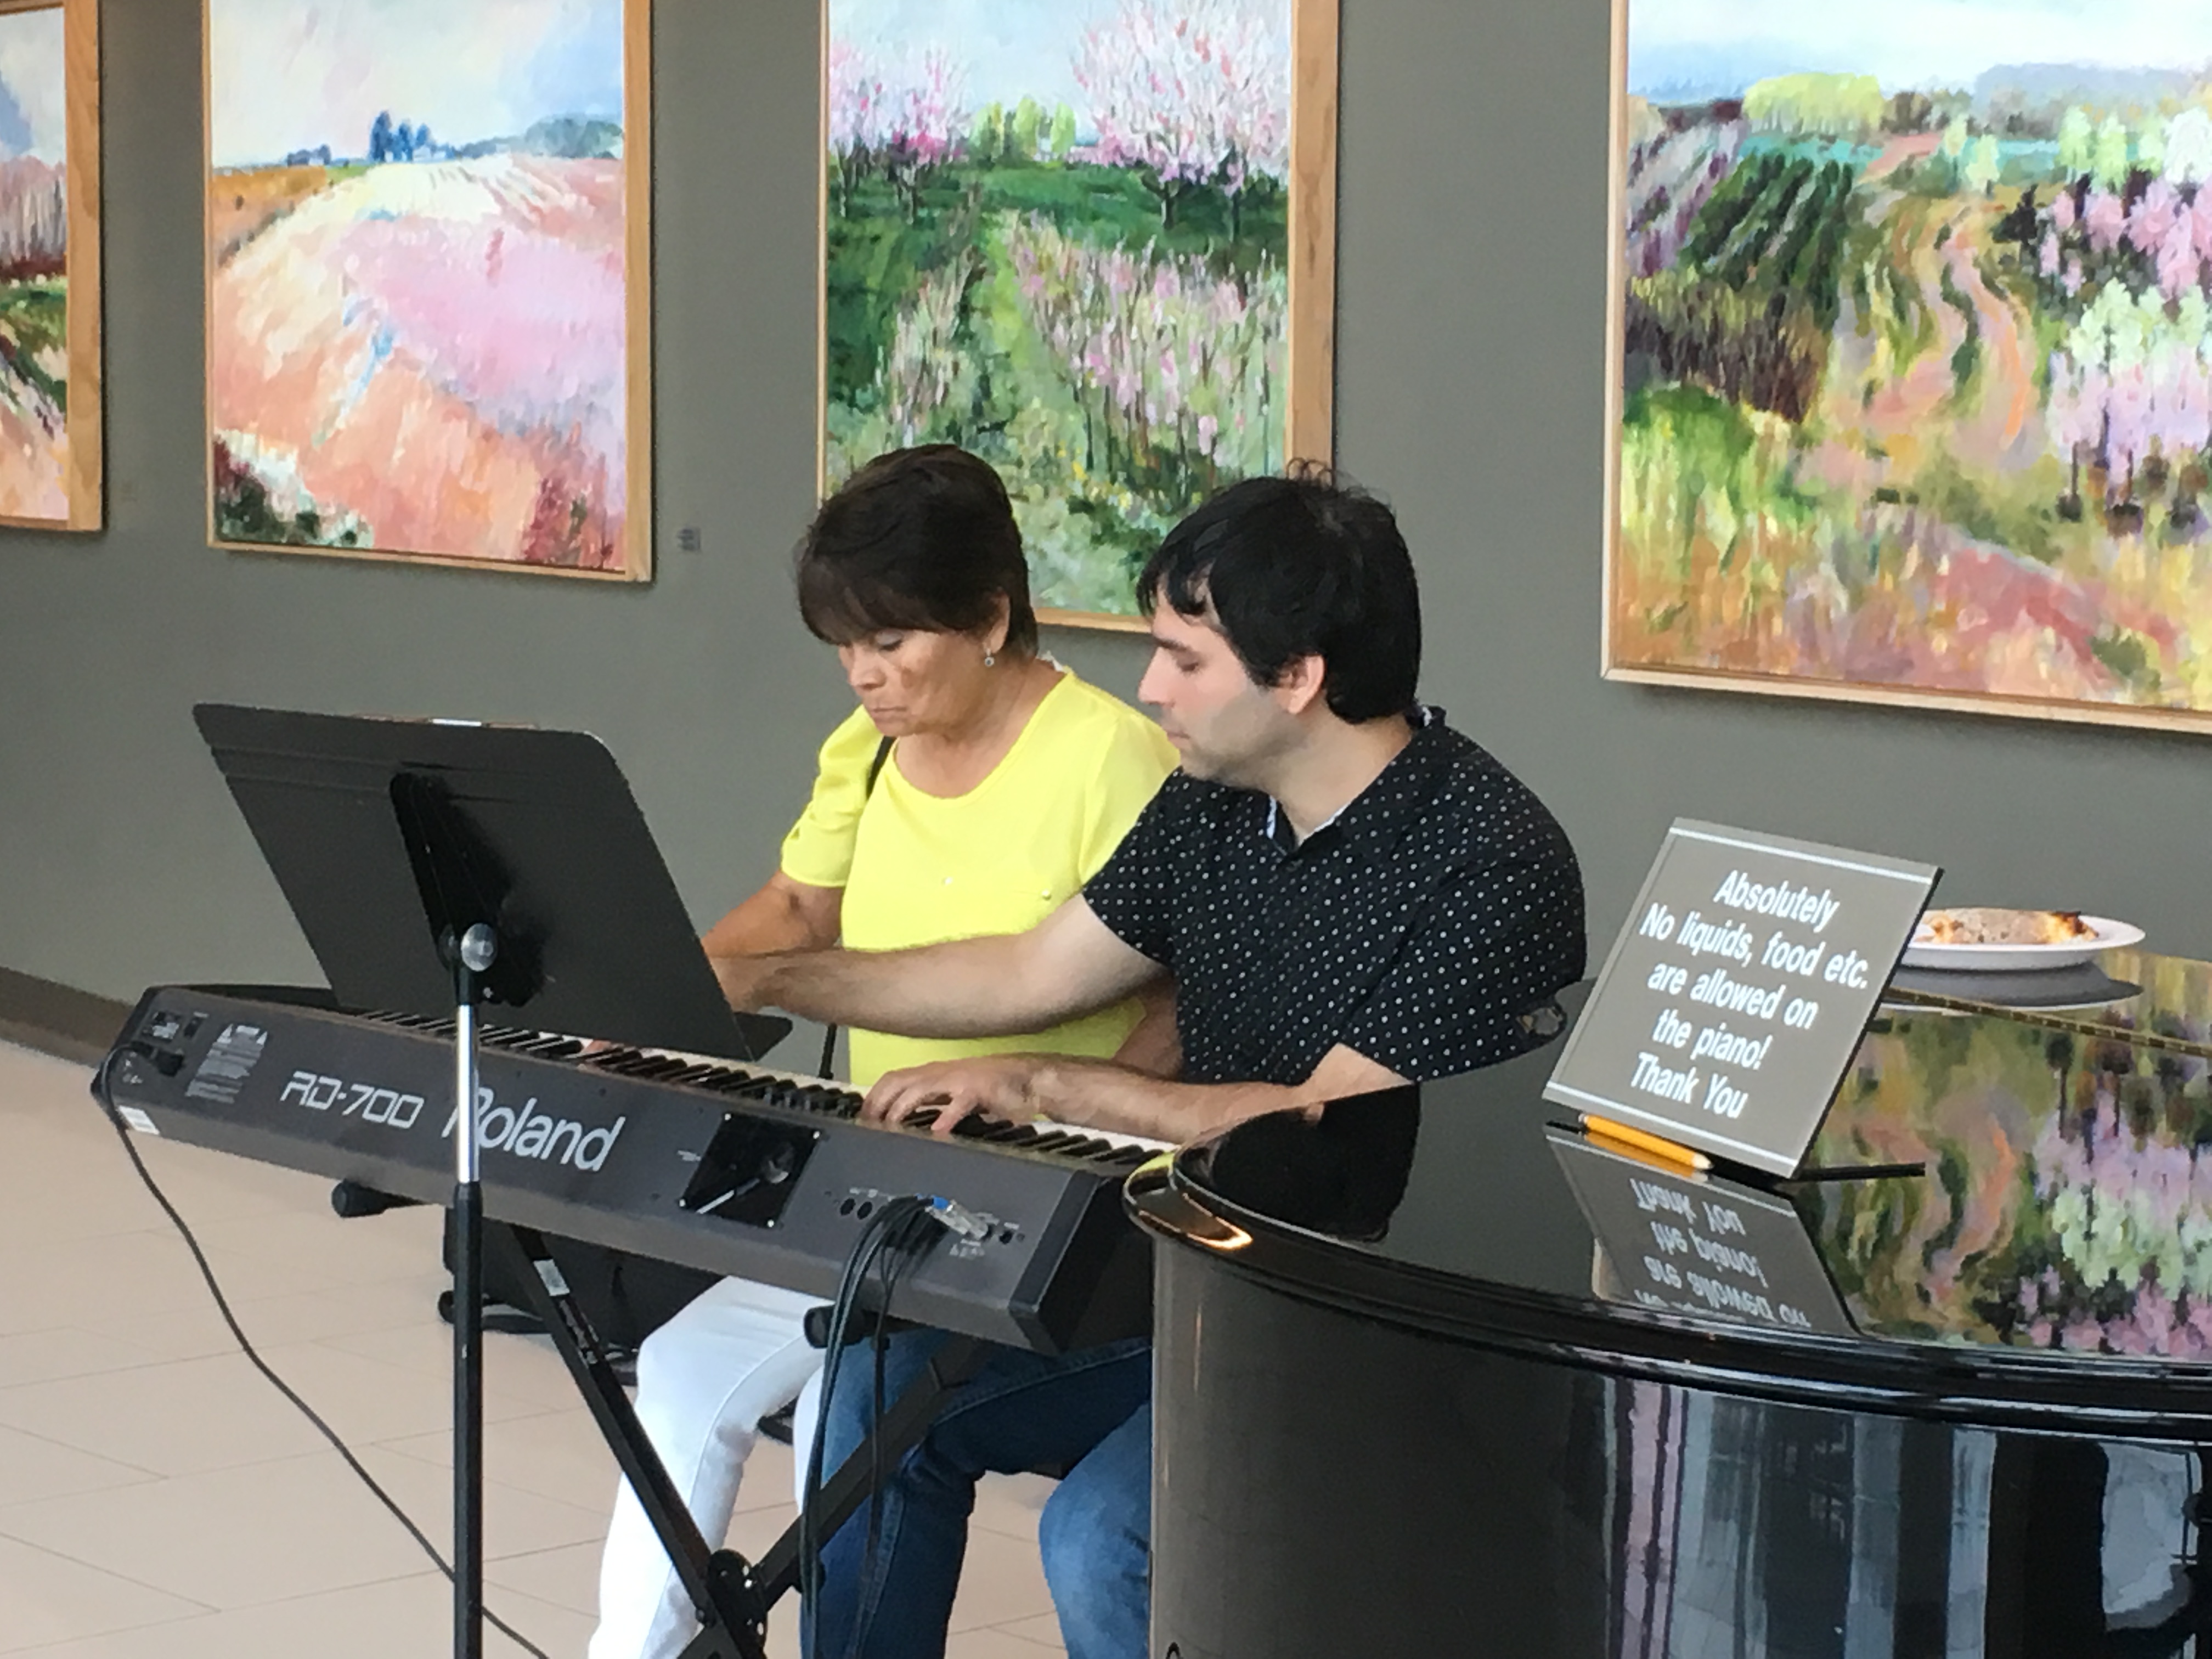 2 members of Piano for Patients playing a duet